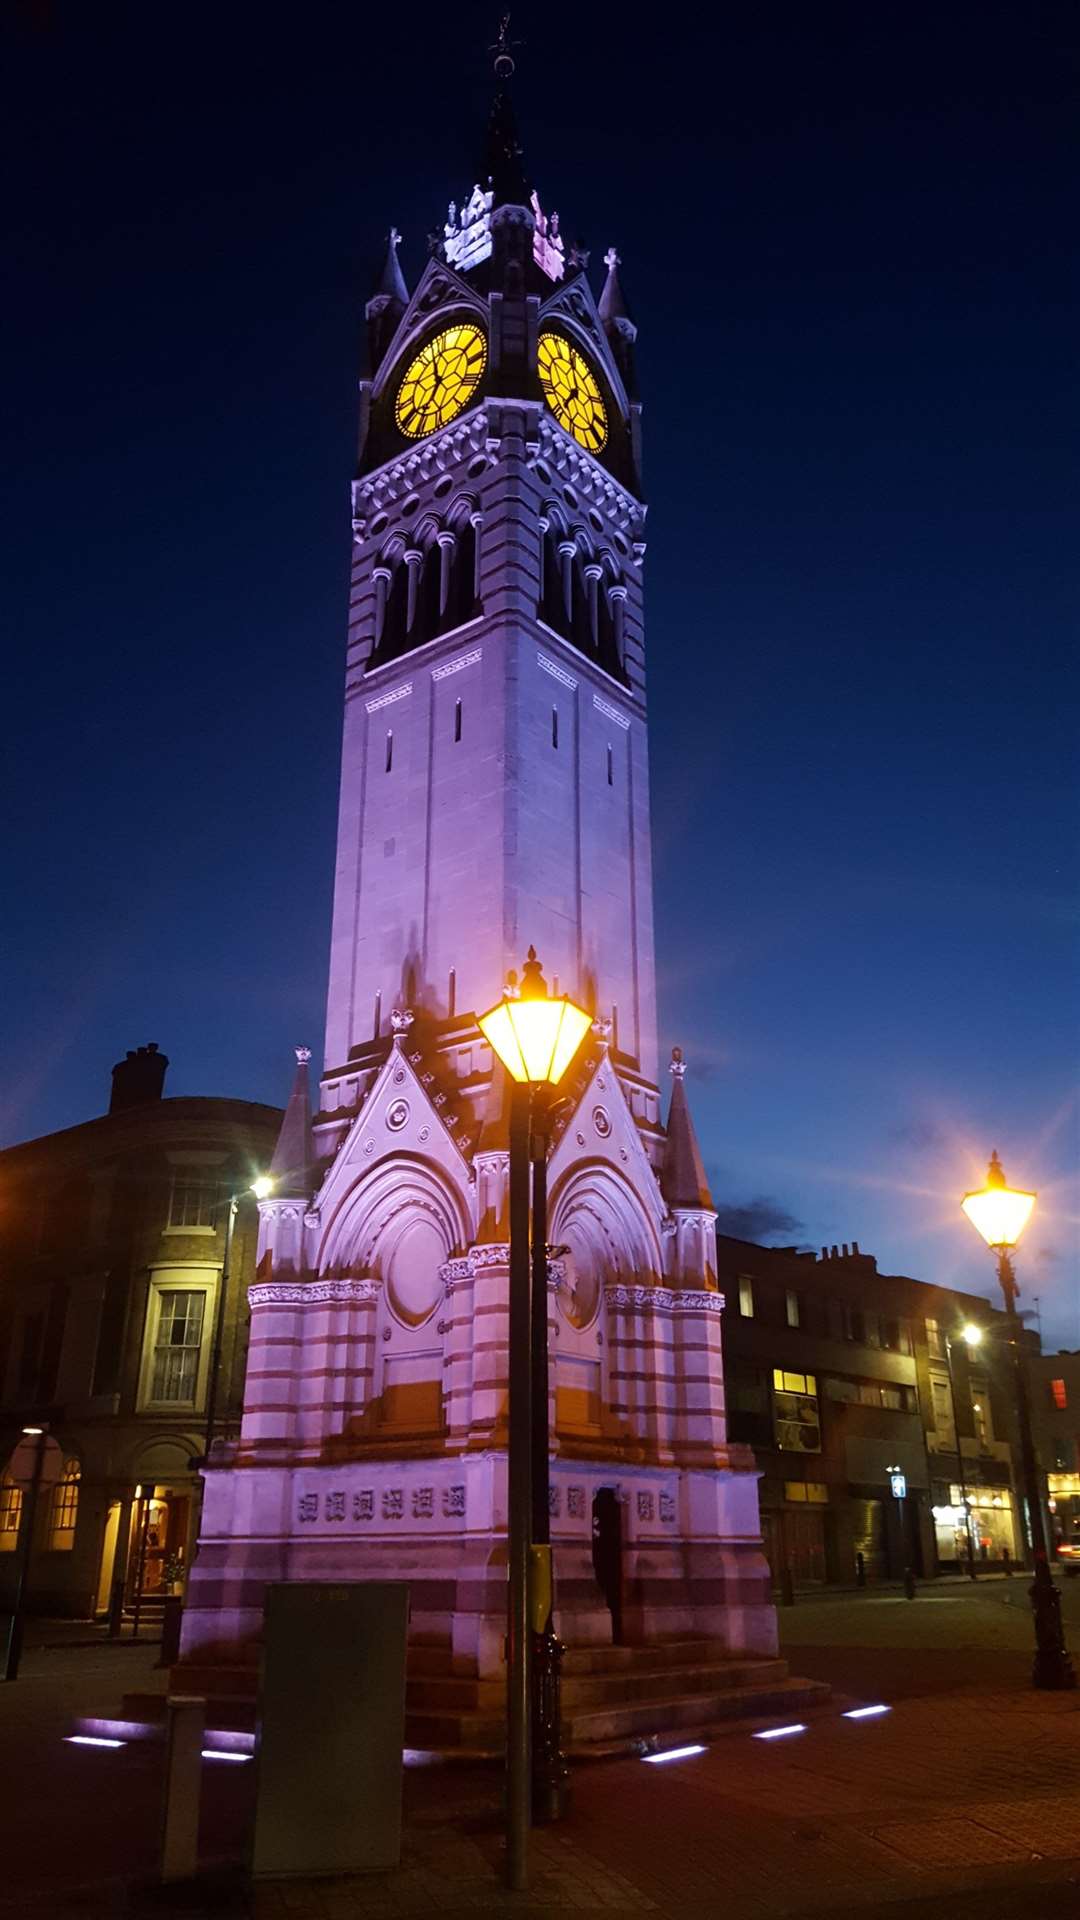 The clock tower in Milton Road, Gravesend, lit up. Picture: Jason Arthur.